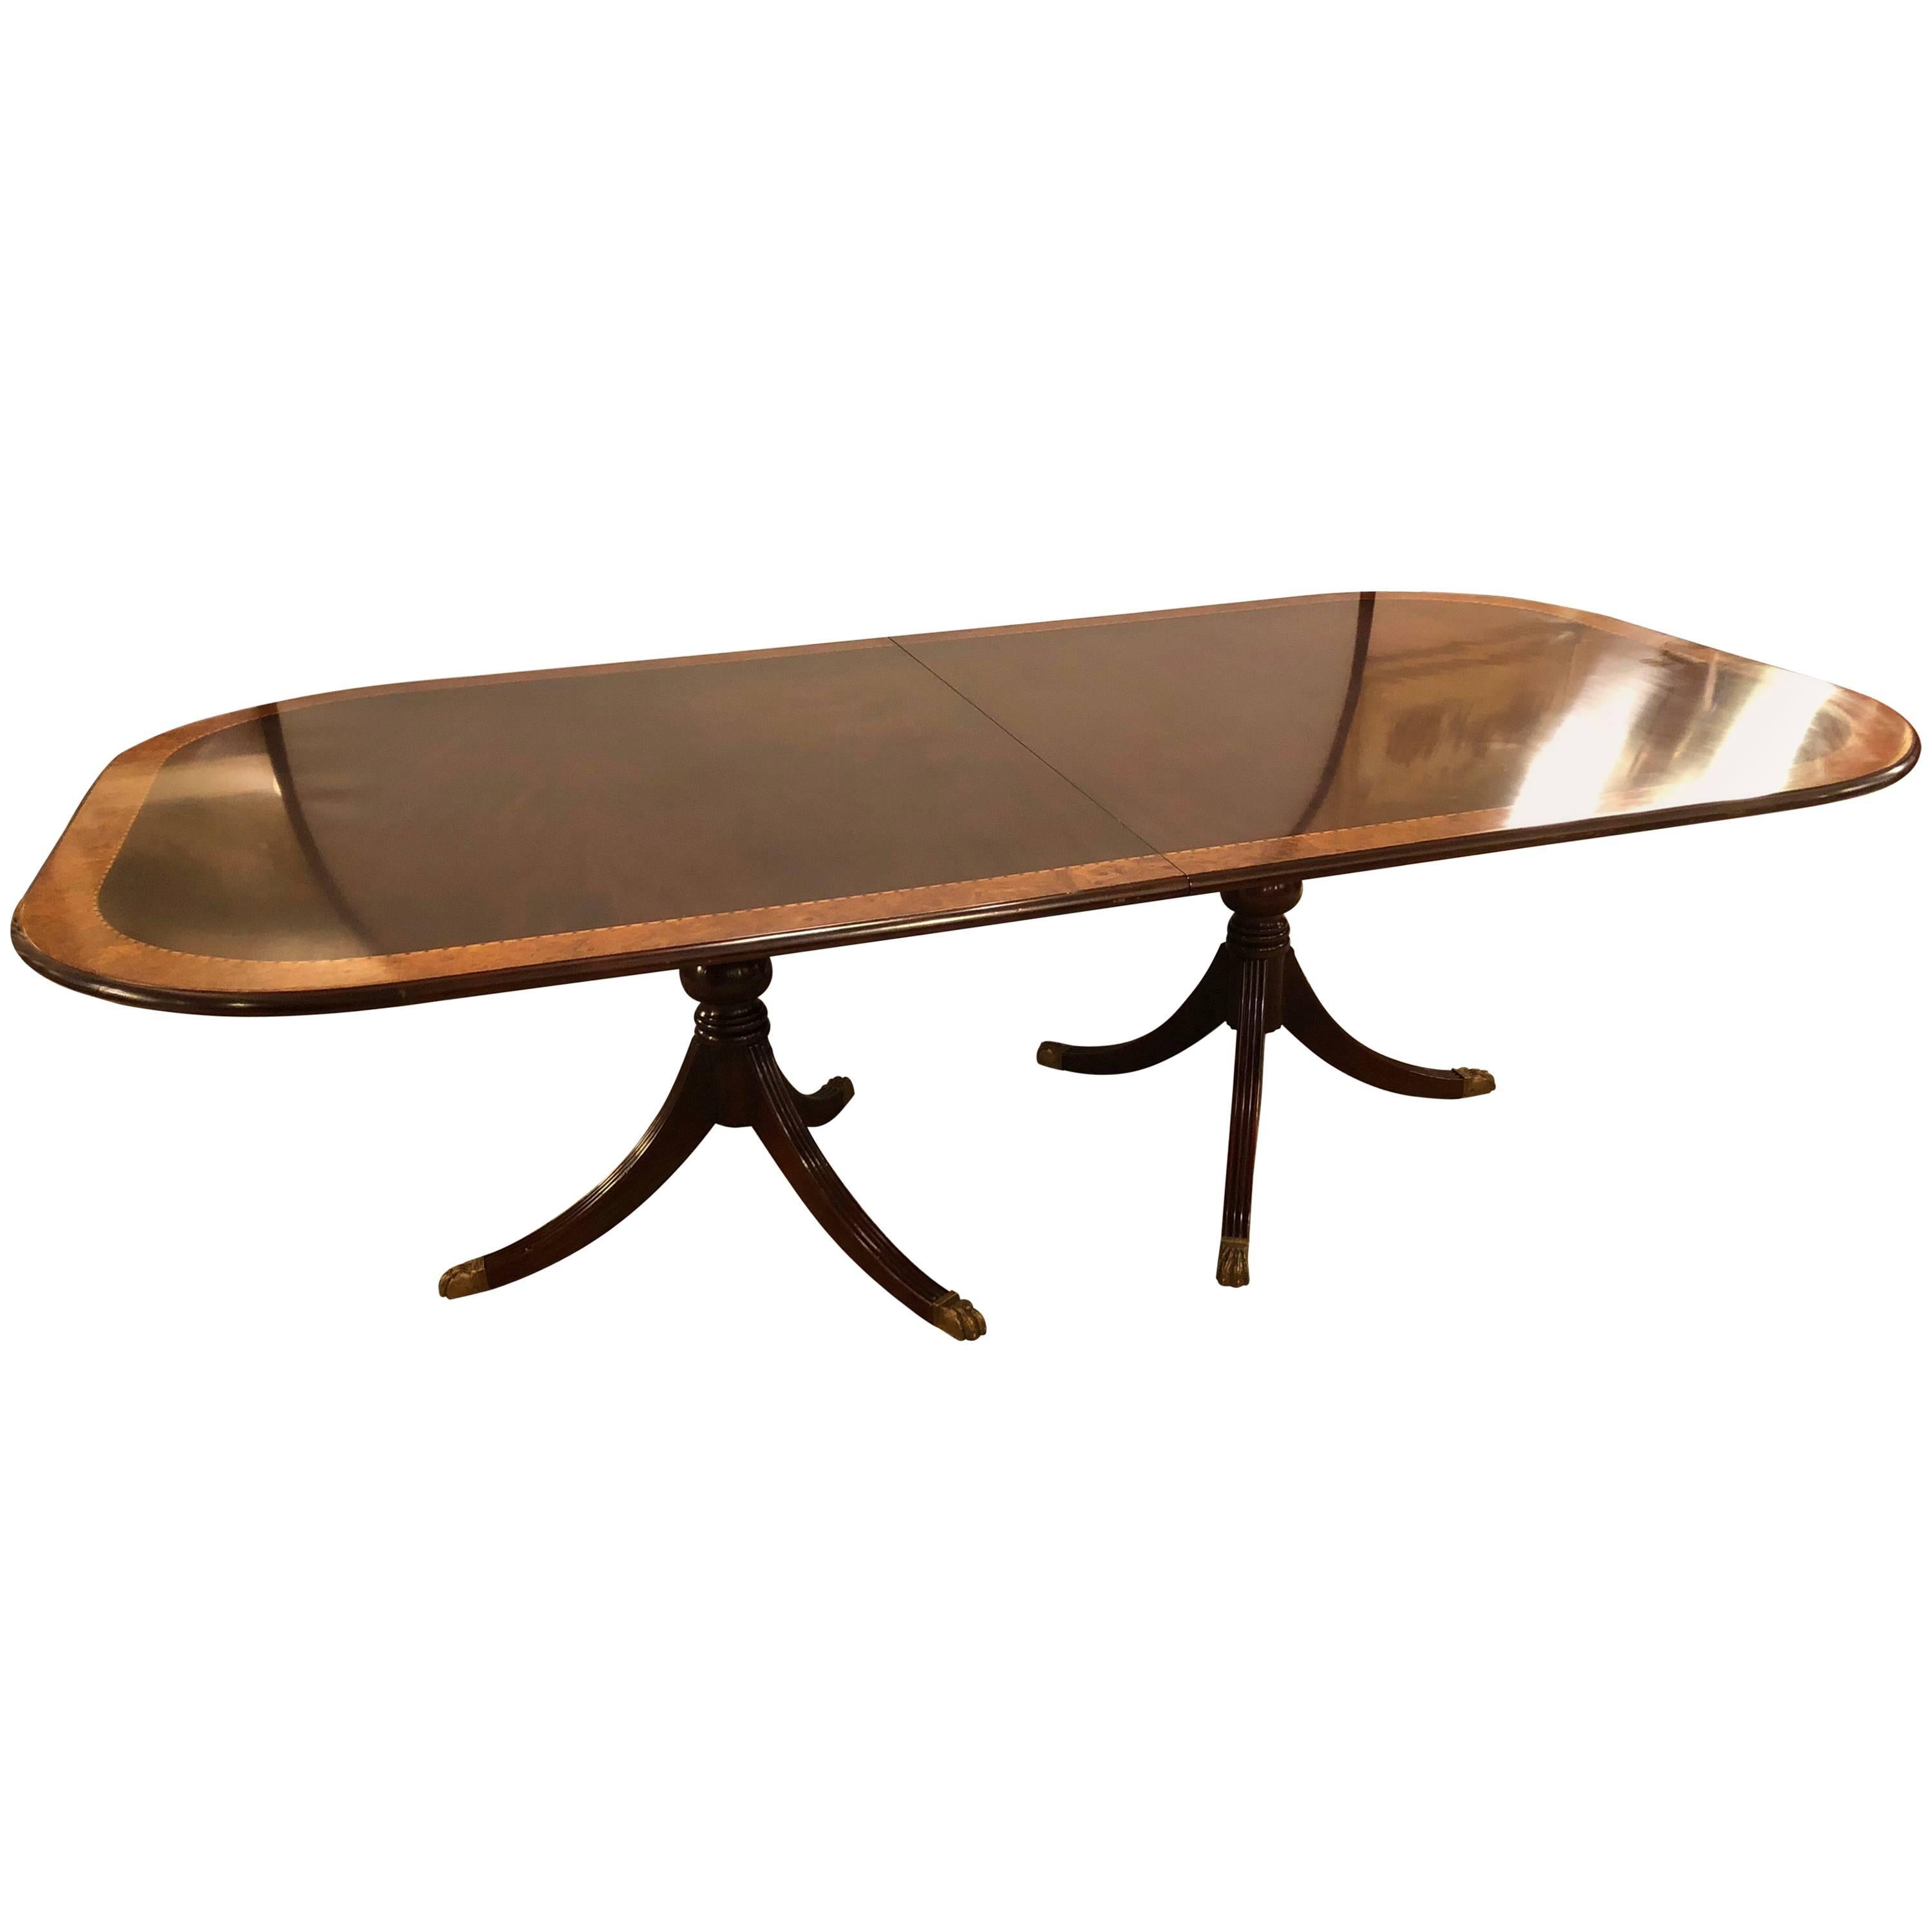 Monumental Georgian Style Banded Dining Room Table with Two Leaves